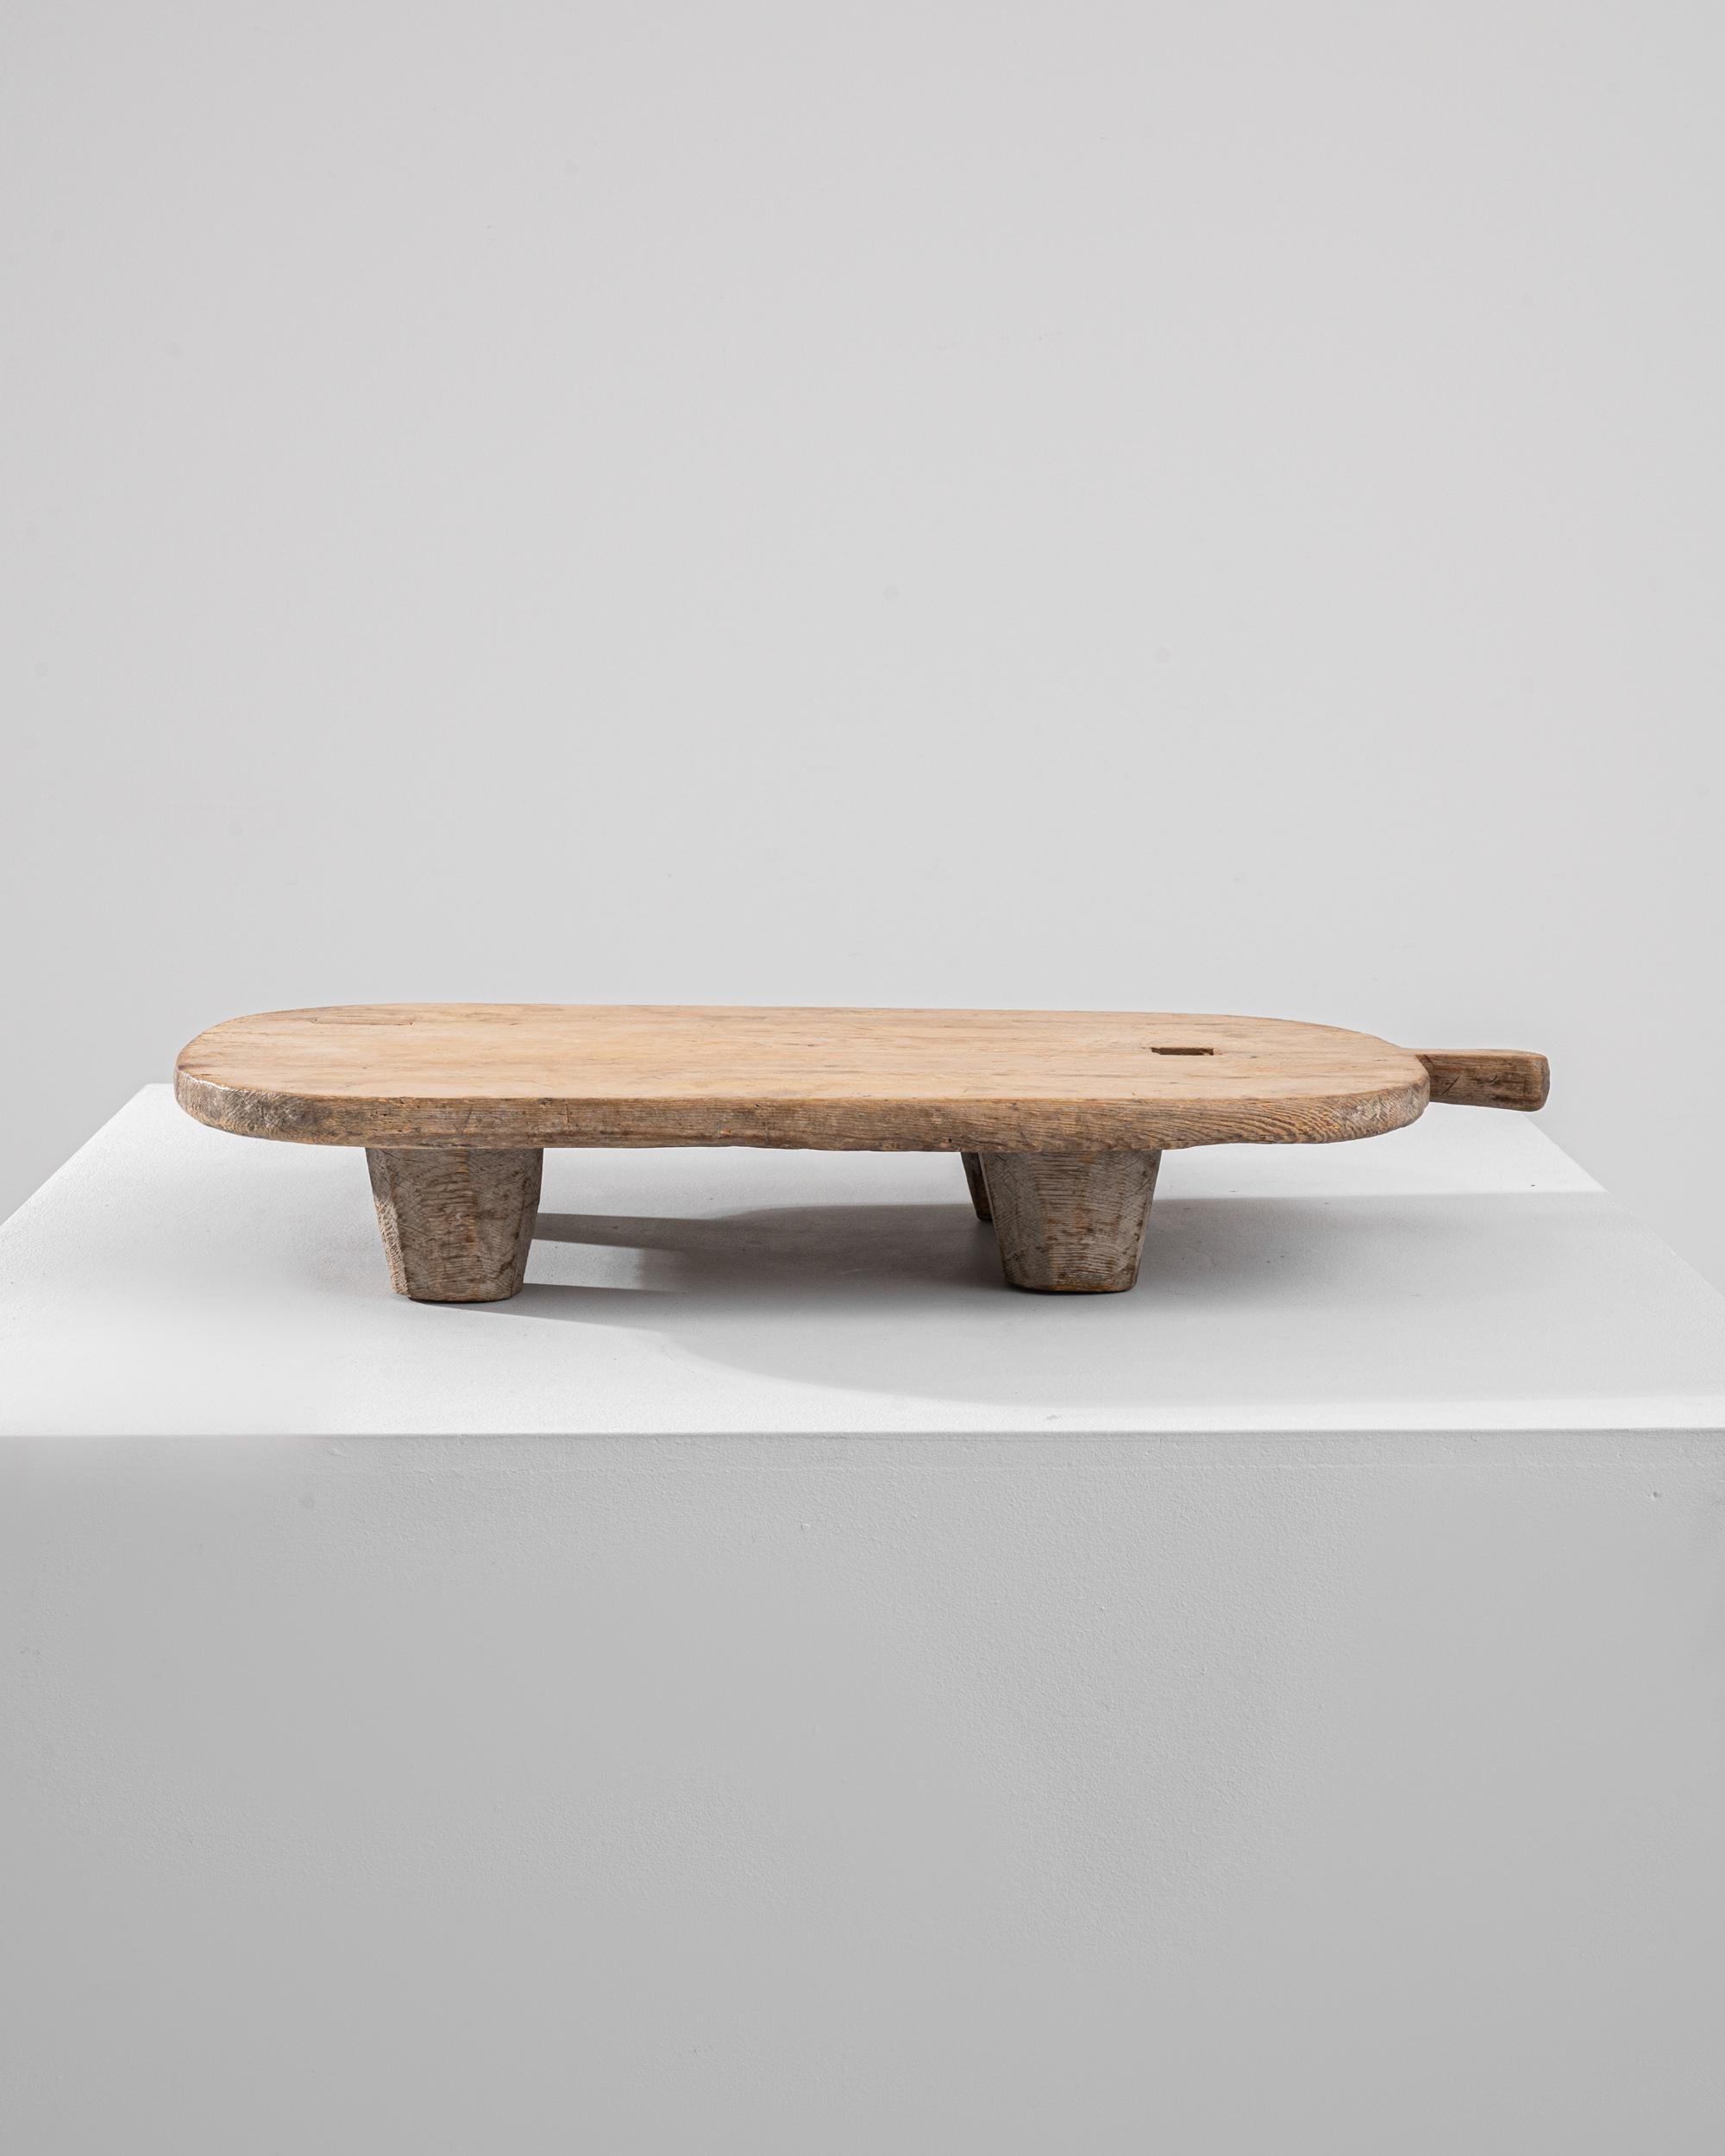 A wooden tray made in Europe during the 19th century. This unassuming and gently shaped cutting board emits a familiar and comforting demeanor. Made from a simple slab of wood, buttressed by short tapering legs, one is able to consider the tree it